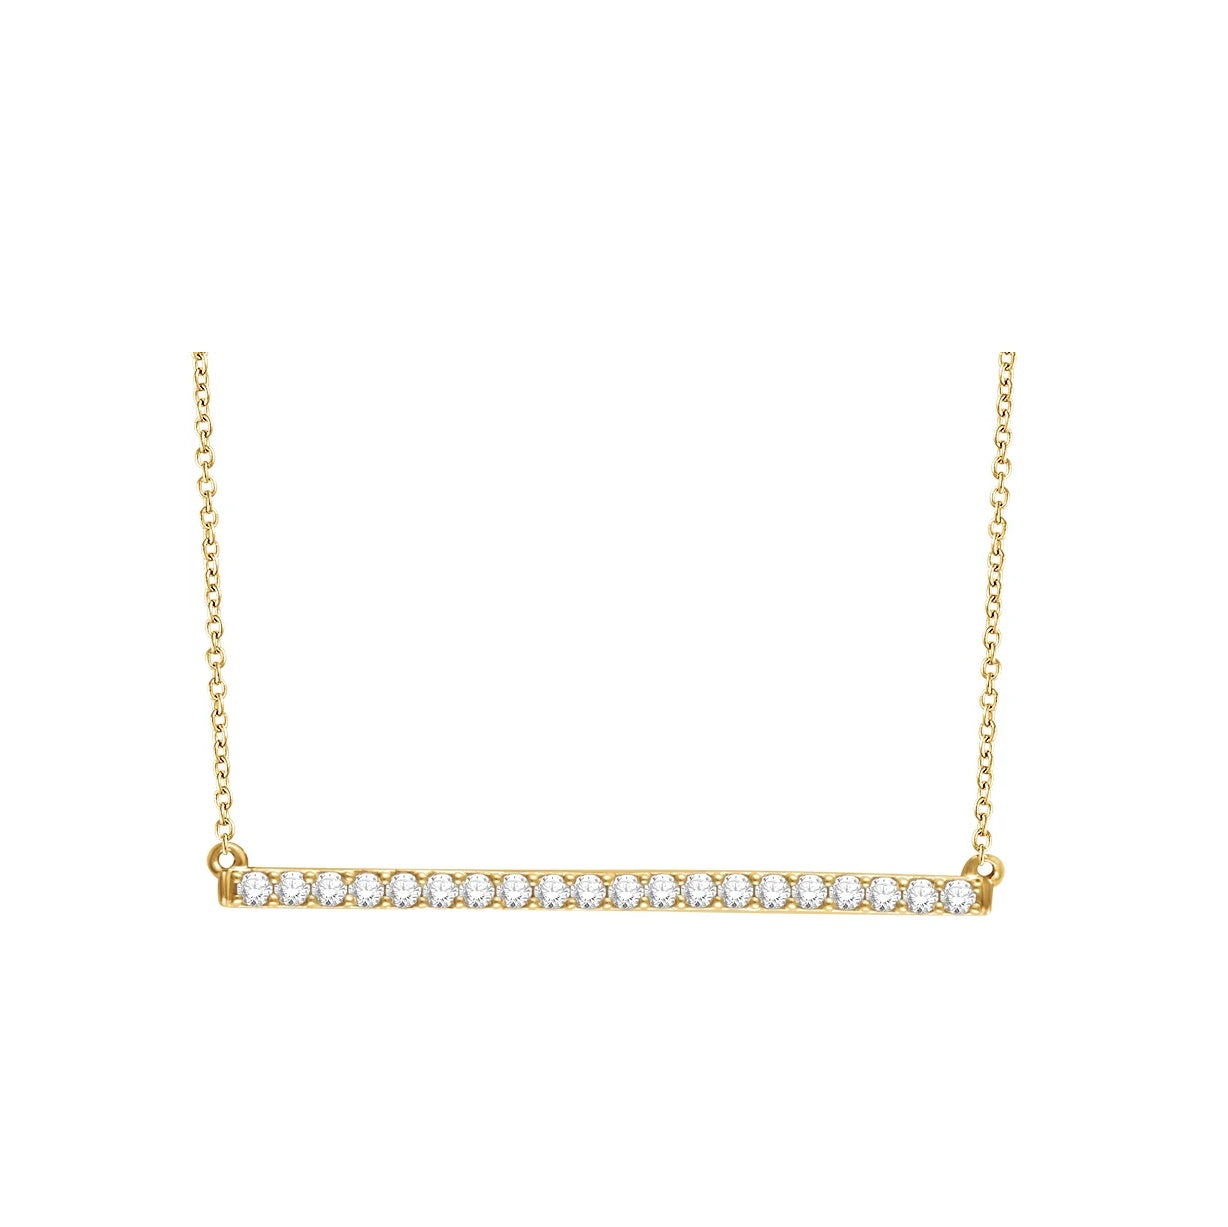 14k Gold Bar Necklace with Diamonds